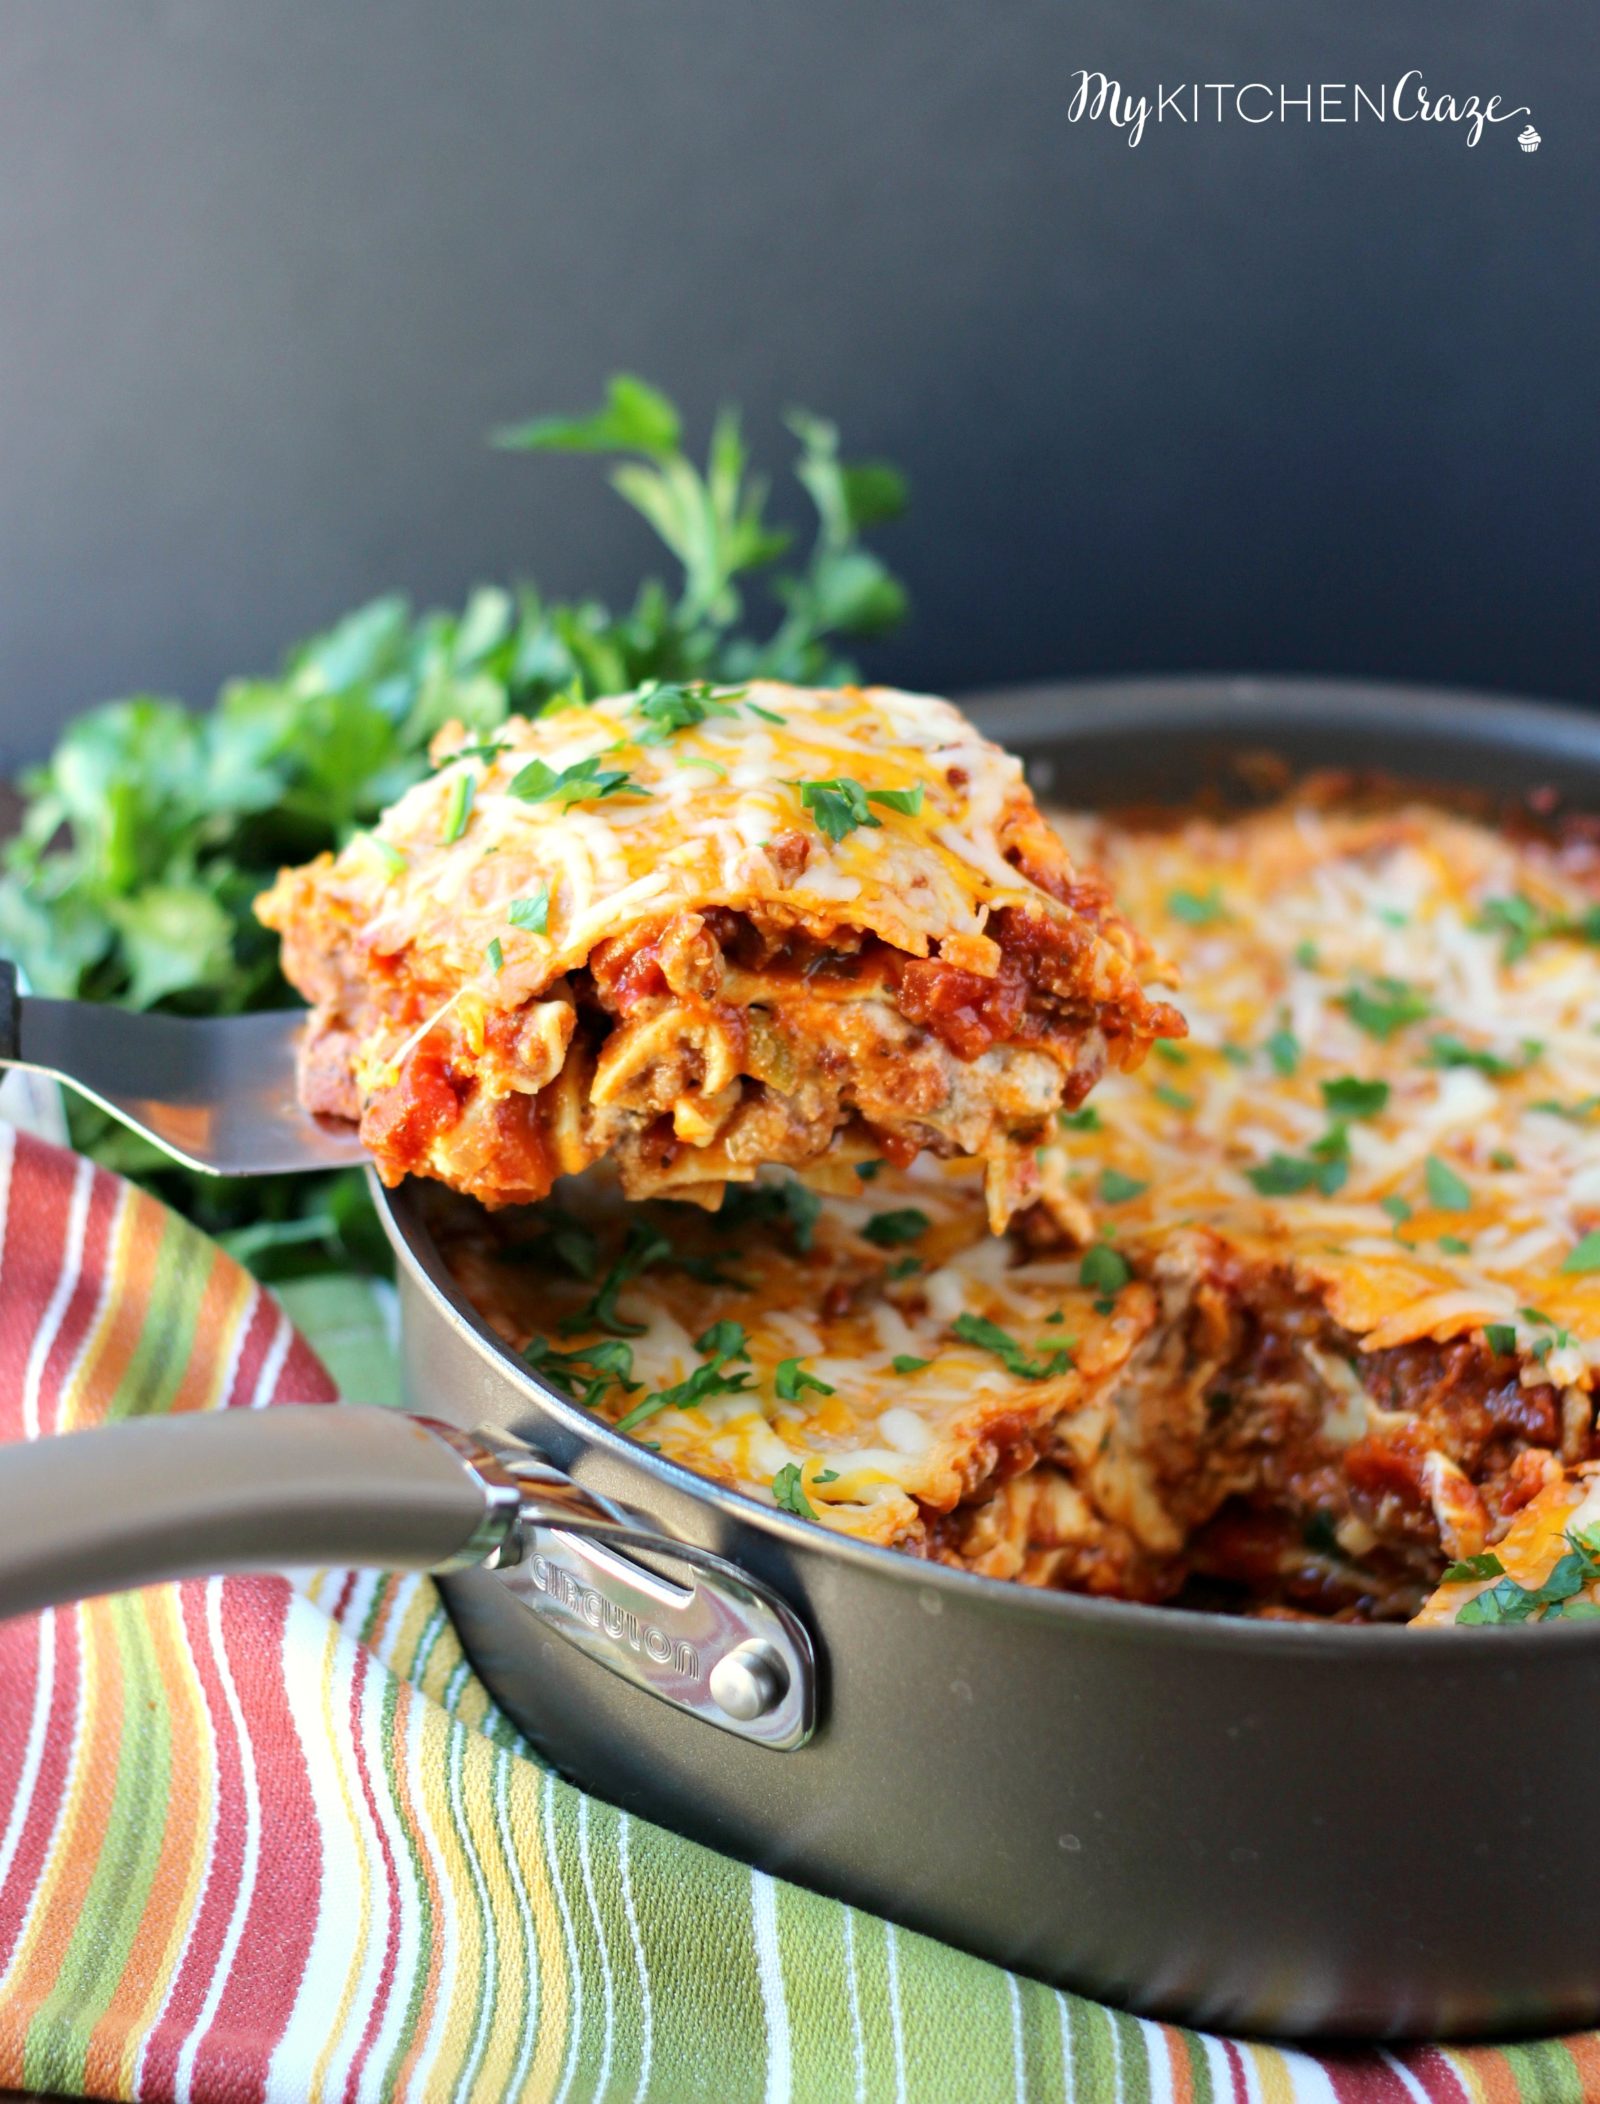 Simple Skillet Lasagna ~ mykitchencraze.com ~ Need an easy meal for dinner tonight? This skillet lasagna will be on your table in no time. Delicious!